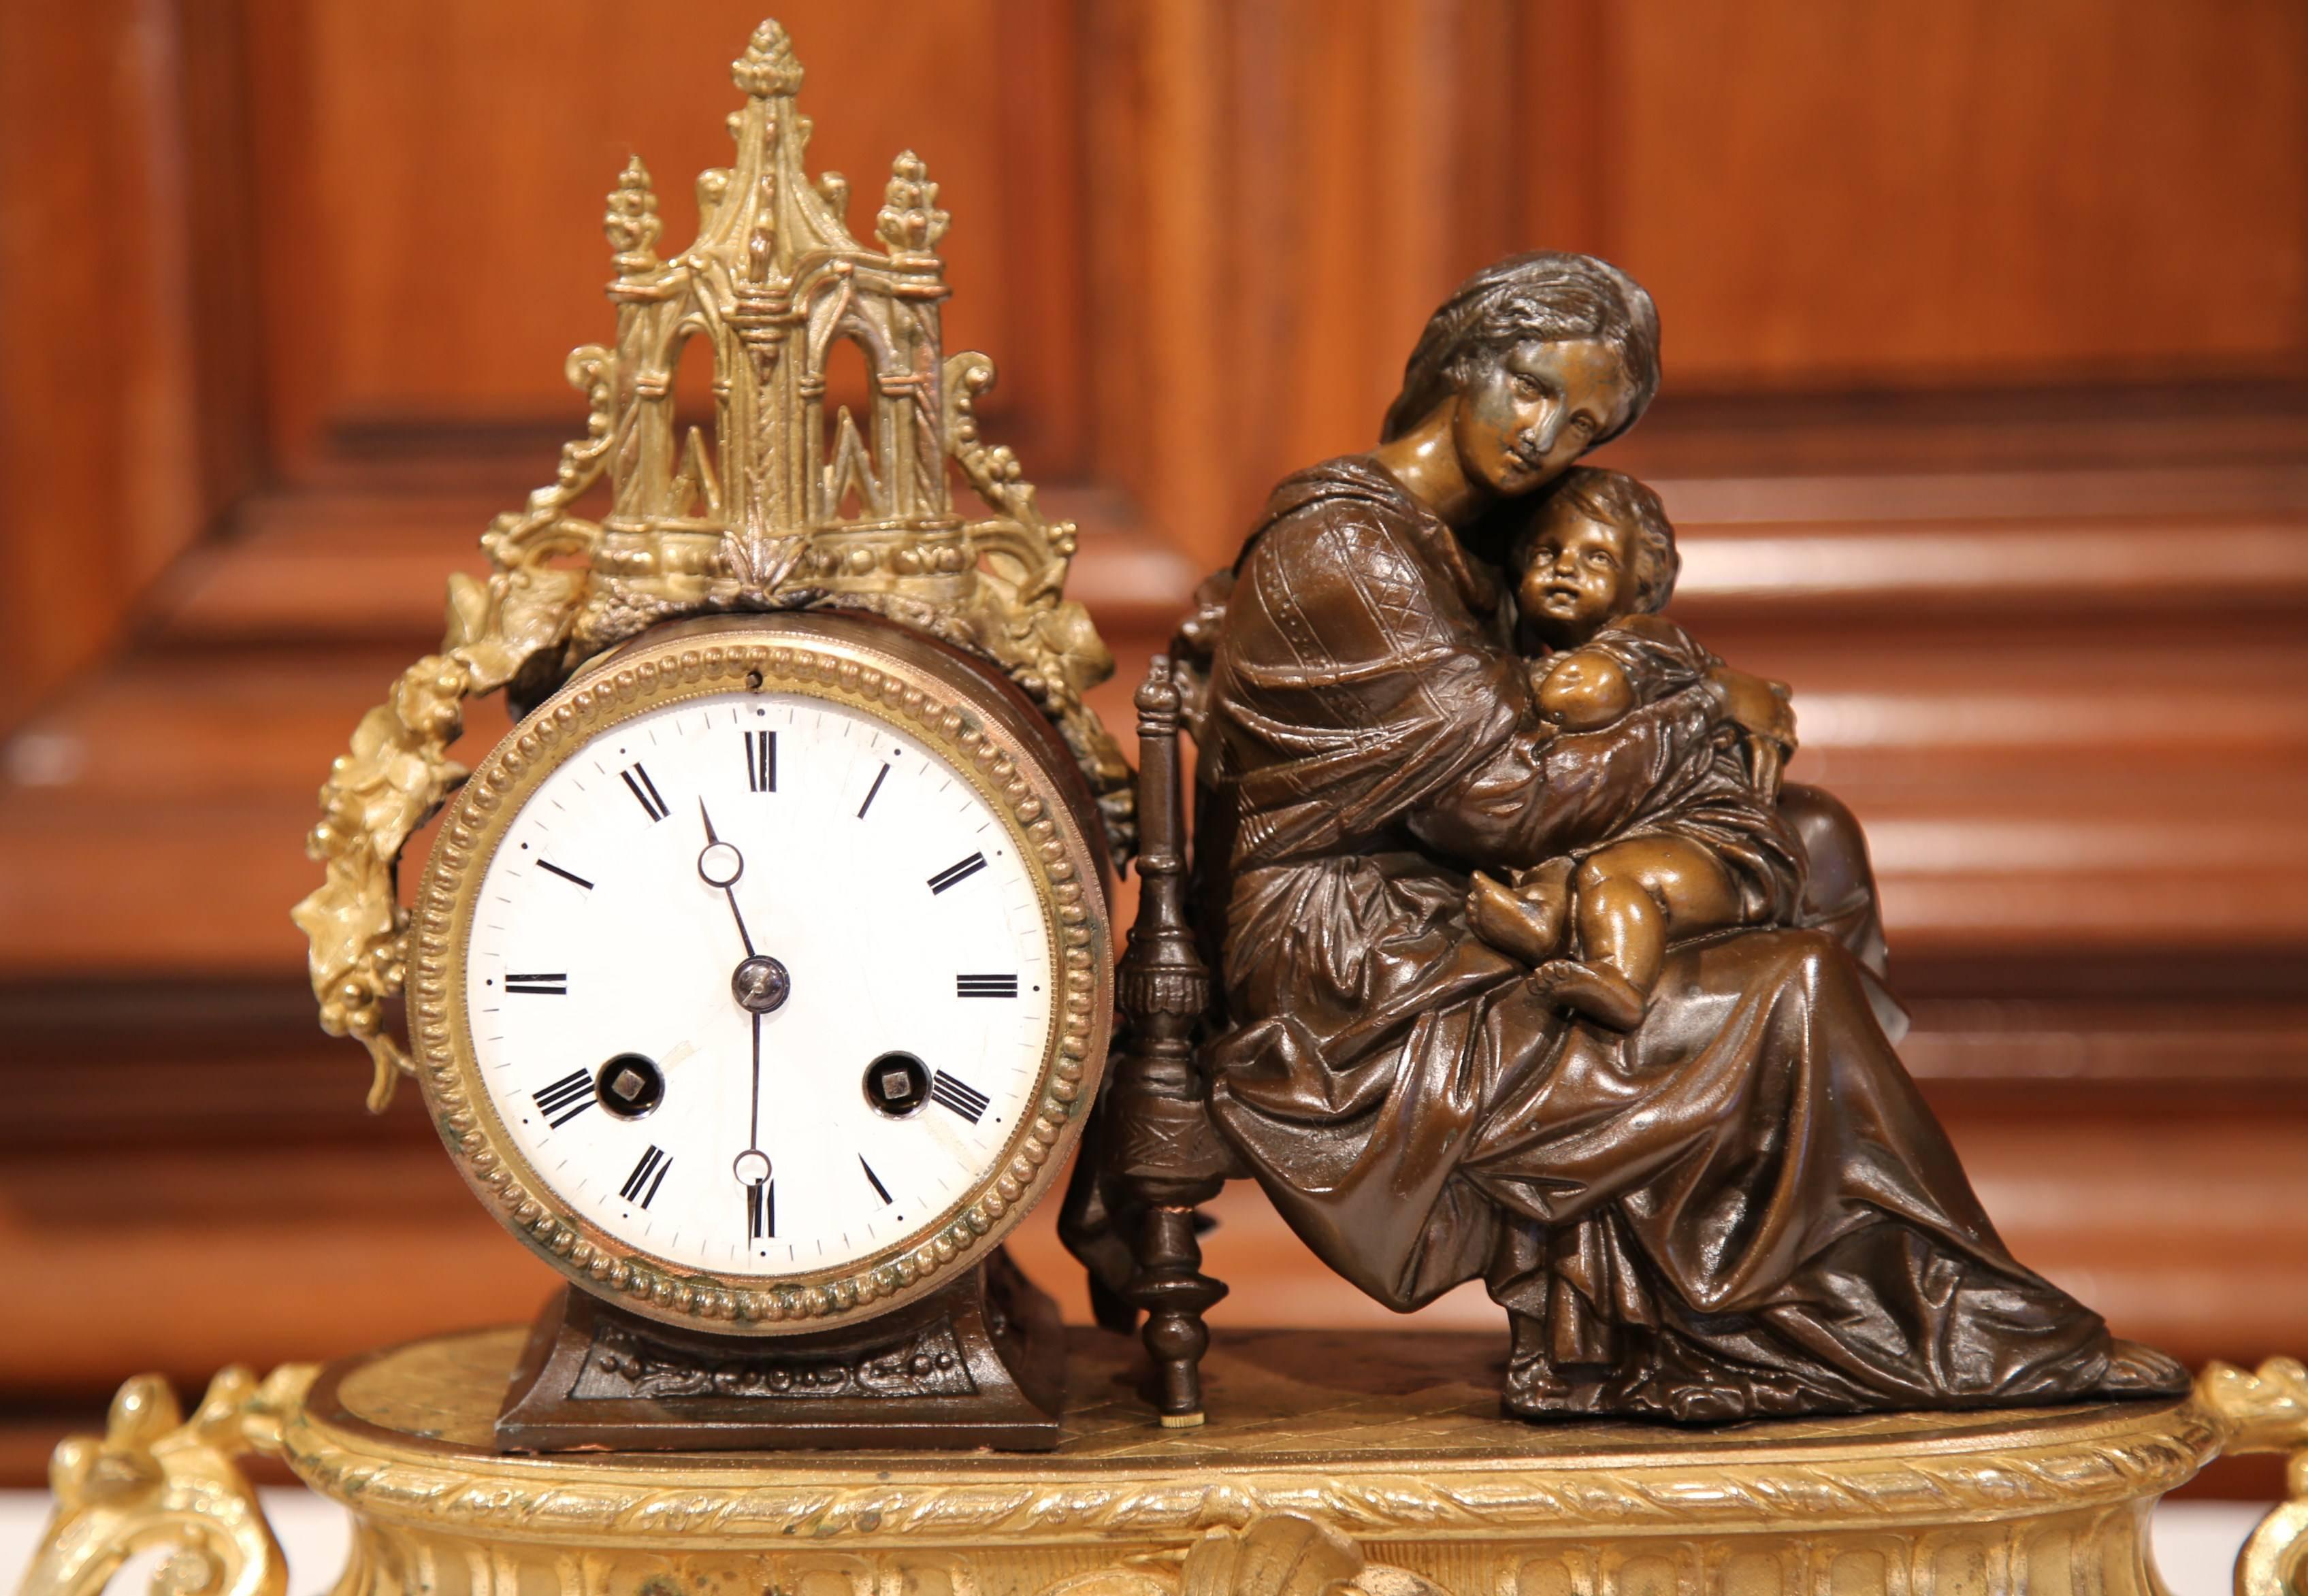 Embellish your desk or mantel with this exquisite antique desk clock from Paris, France, circa 1860. The timepiece features the Virgin Mary sitting on a chair holding baby Jesus. On the left side, there is a round, analogue clock in wonderful